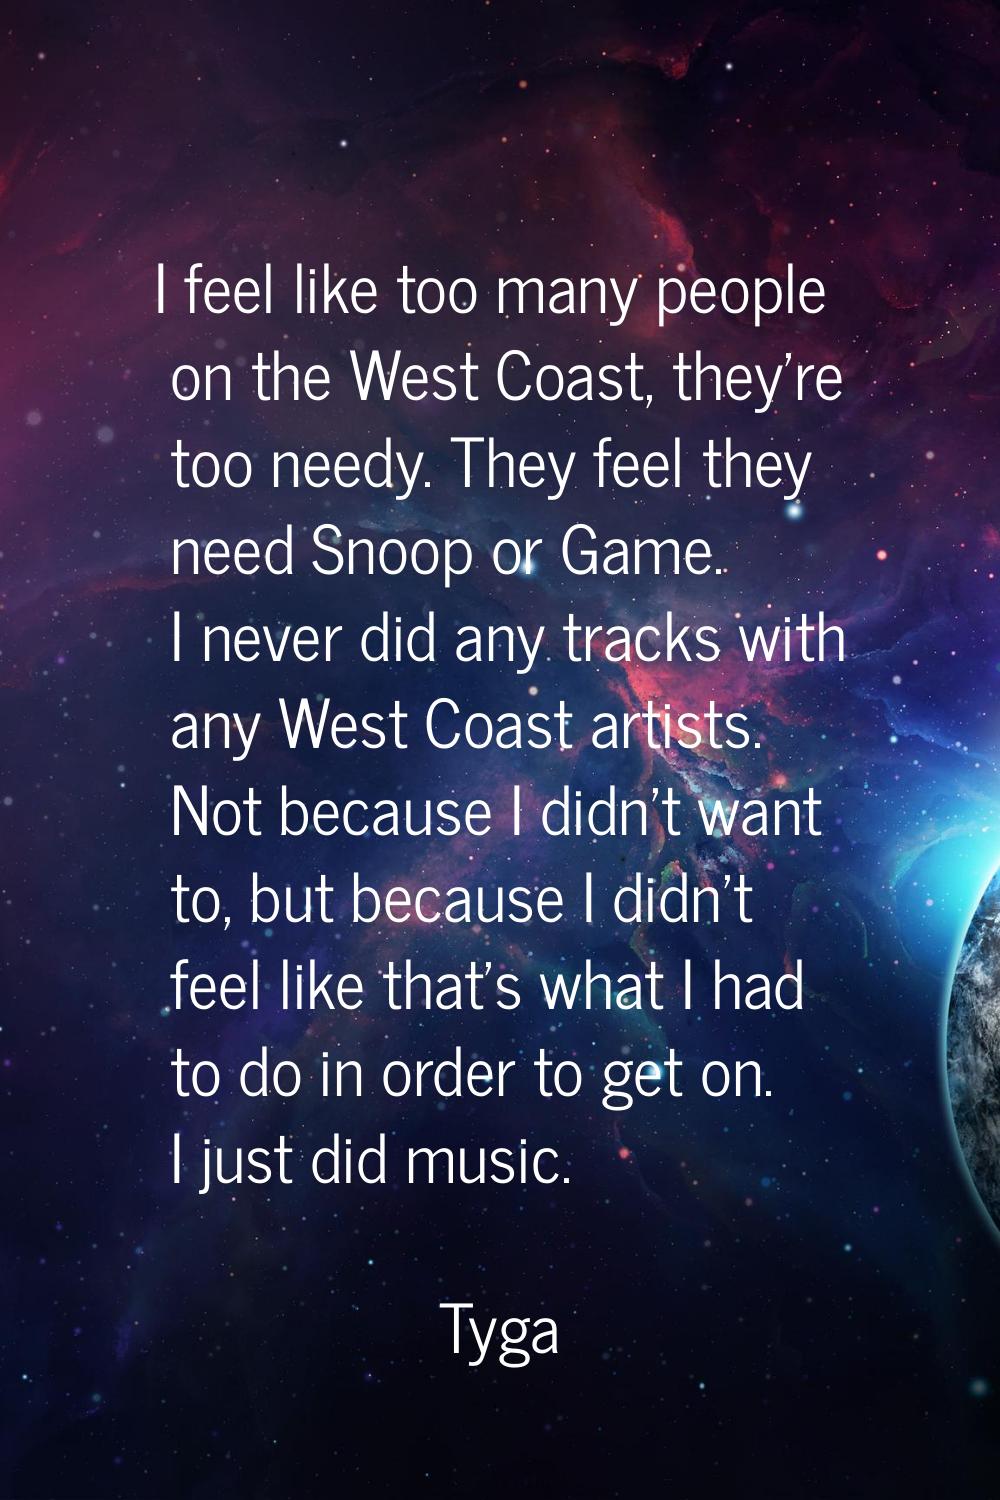 I feel like too many people on the West Coast, they're too needy. They feel they need Snoop or Game